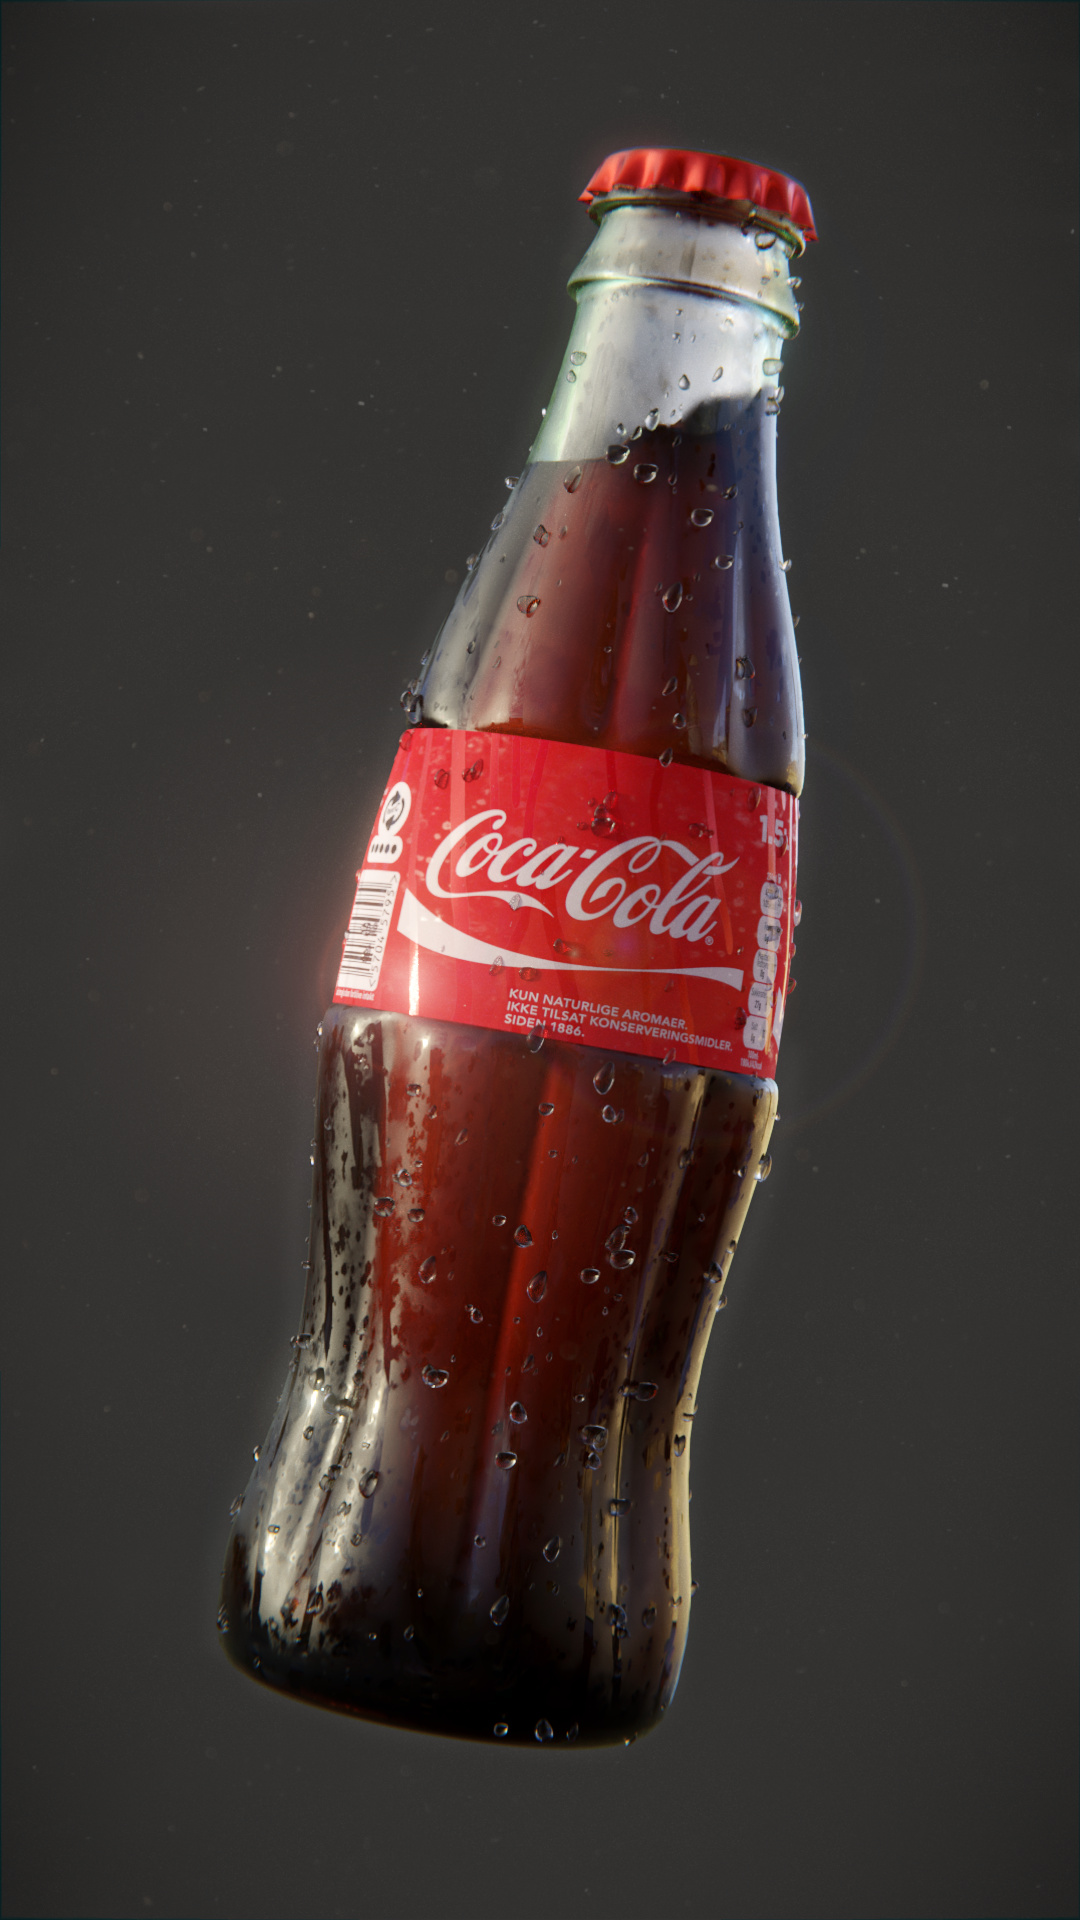 Coca-Cola: A sweetened carbonated beverage that is a cultural institution in the United States. 1080x1920 Full HD Wallpaper.